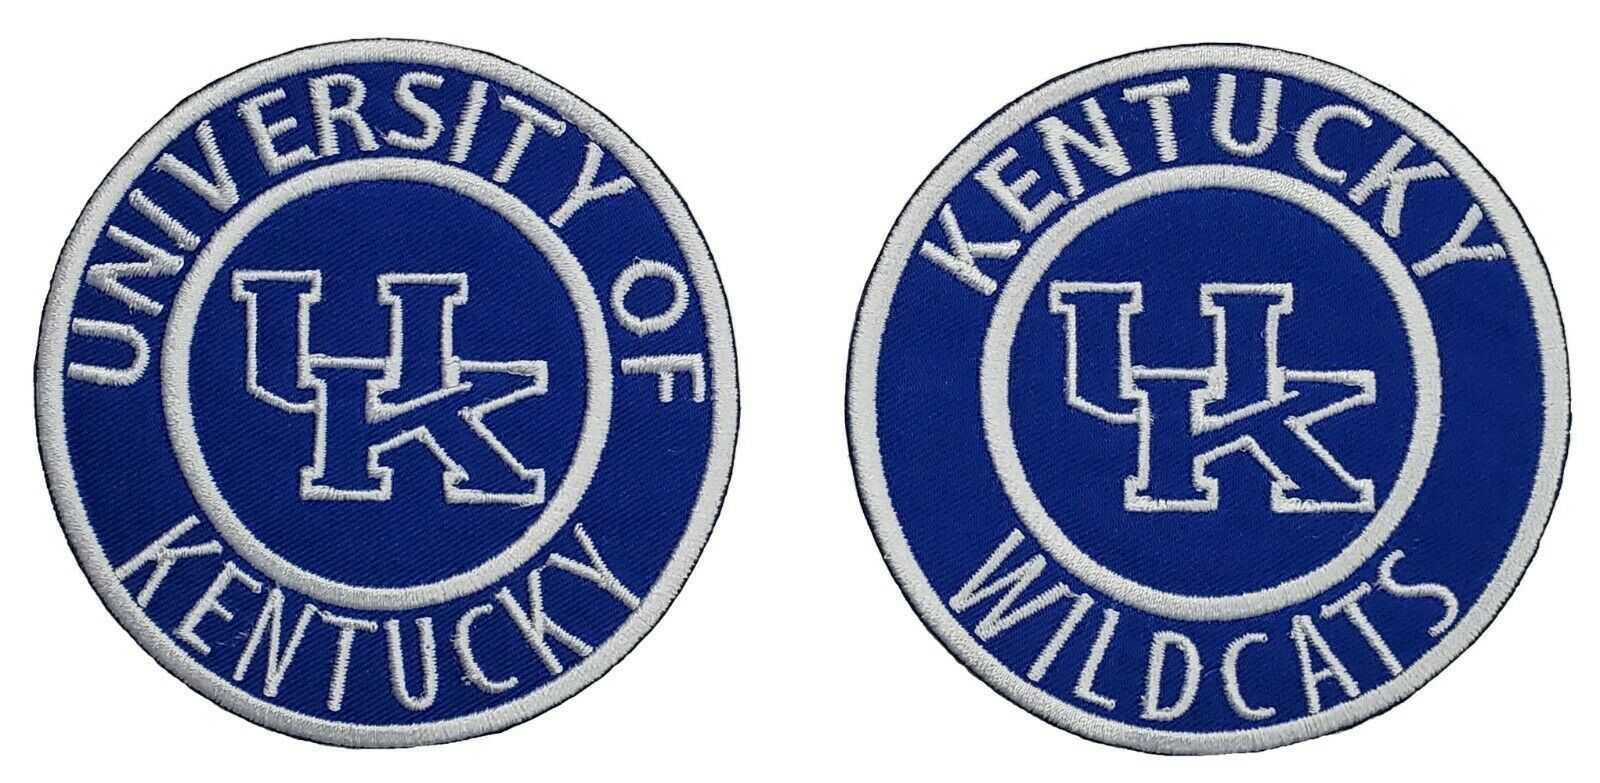 University of Kentucky Wildcats NCAA Football Embroidered Applique Iron On Patch - $8.47 - $10.46